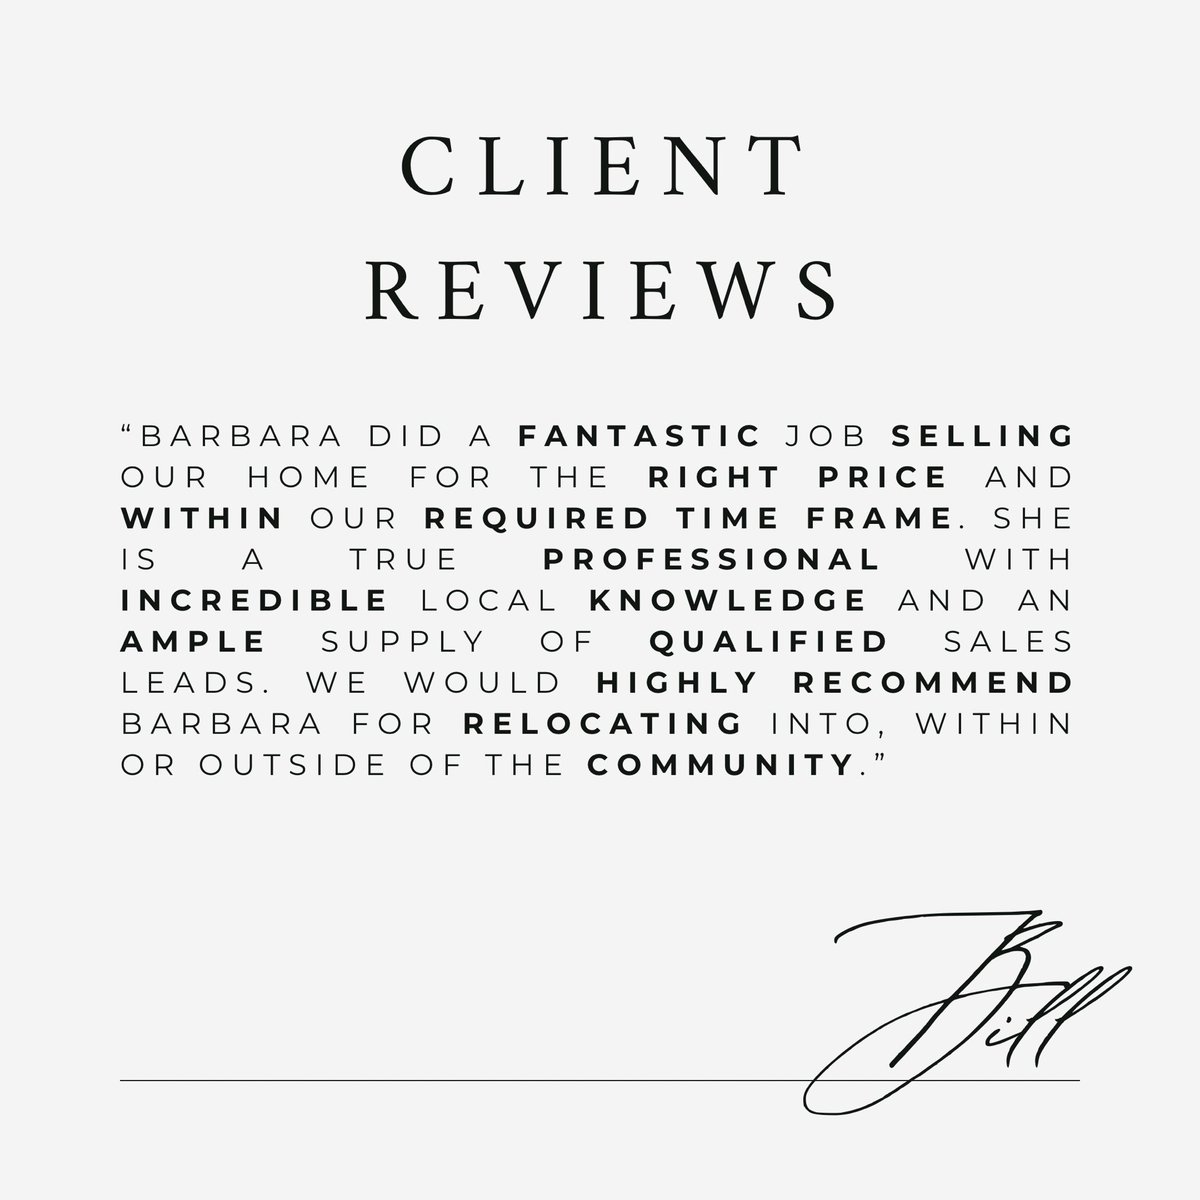 This is a total eclipse of my heart! 📝 #ClientReviews 🌟🌟🌟🌟🌟

➡️ zillow.com/profile/Barbar…
.
.
.
.
#SoldByBarbara #CallBarbara #ILoveWhatIDo #ListenToYourBroker #ListWithMe #BuyWithMe #DouglasElliman #DouglasEllimanRealEstate #DE #EllimanAgents #EllimanLI #LongIsland